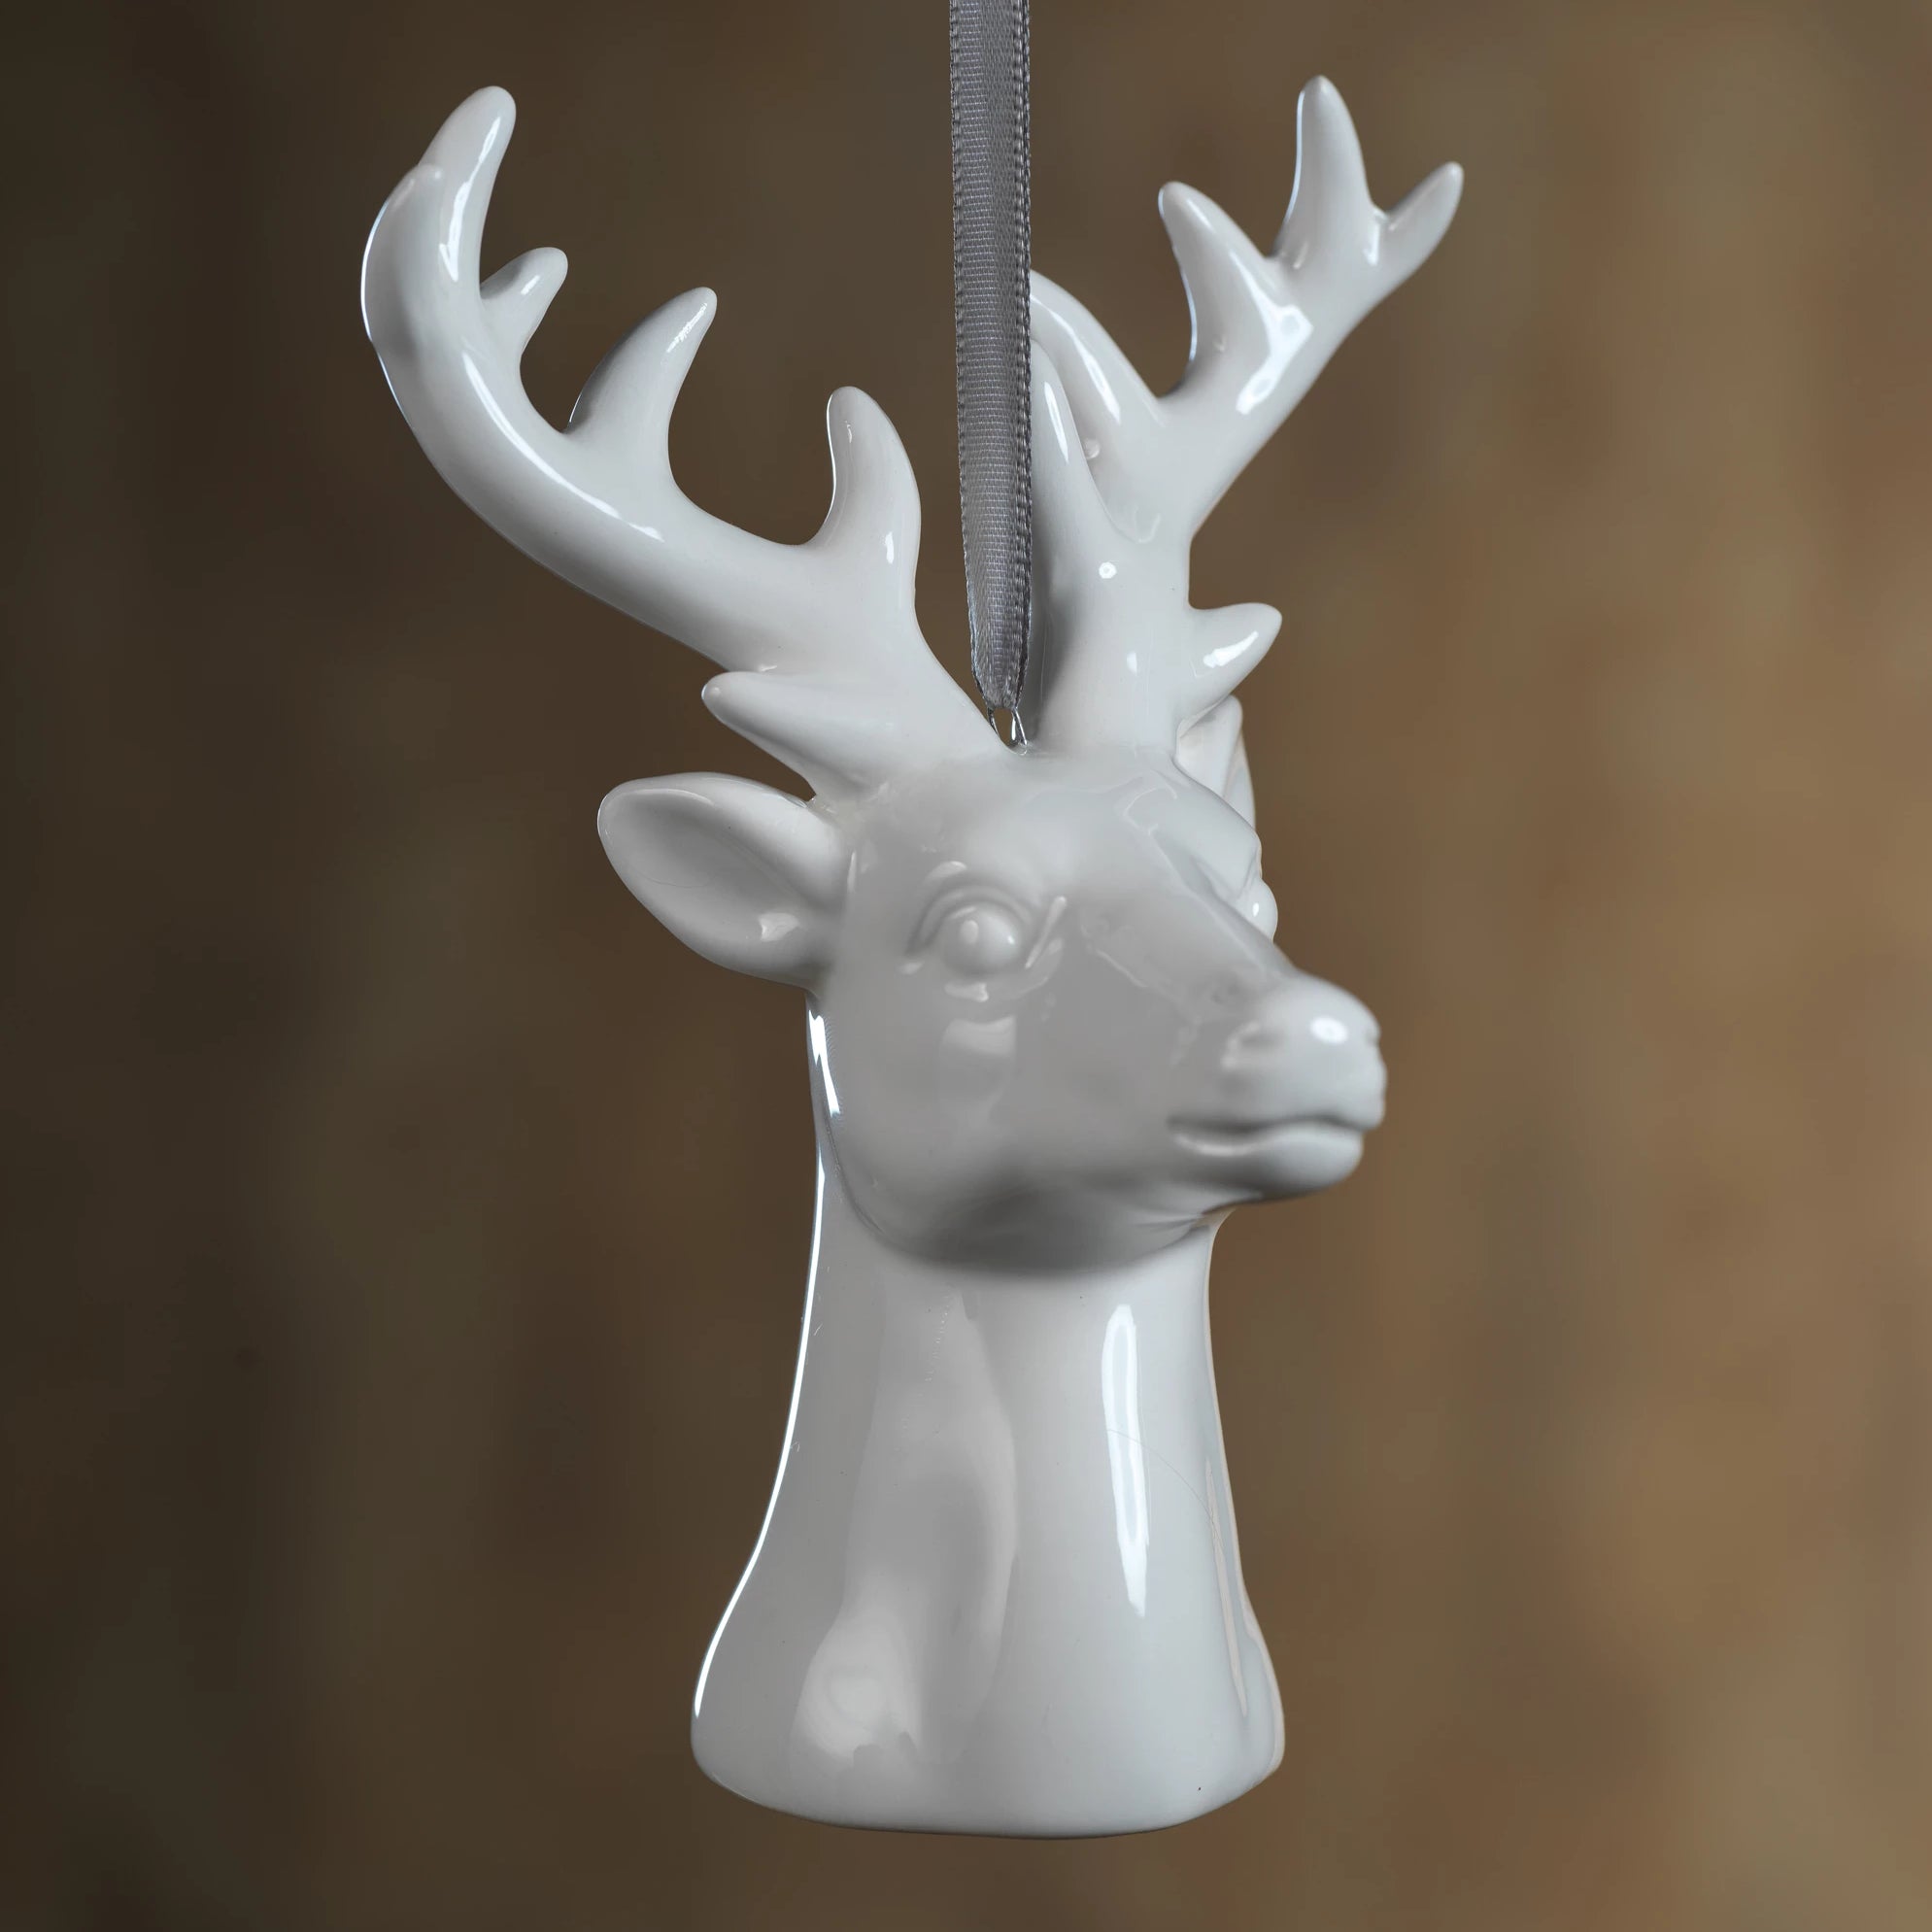 Ceramic White Reindeer Ornament - Set of 4 - CARLYLE AVENUE